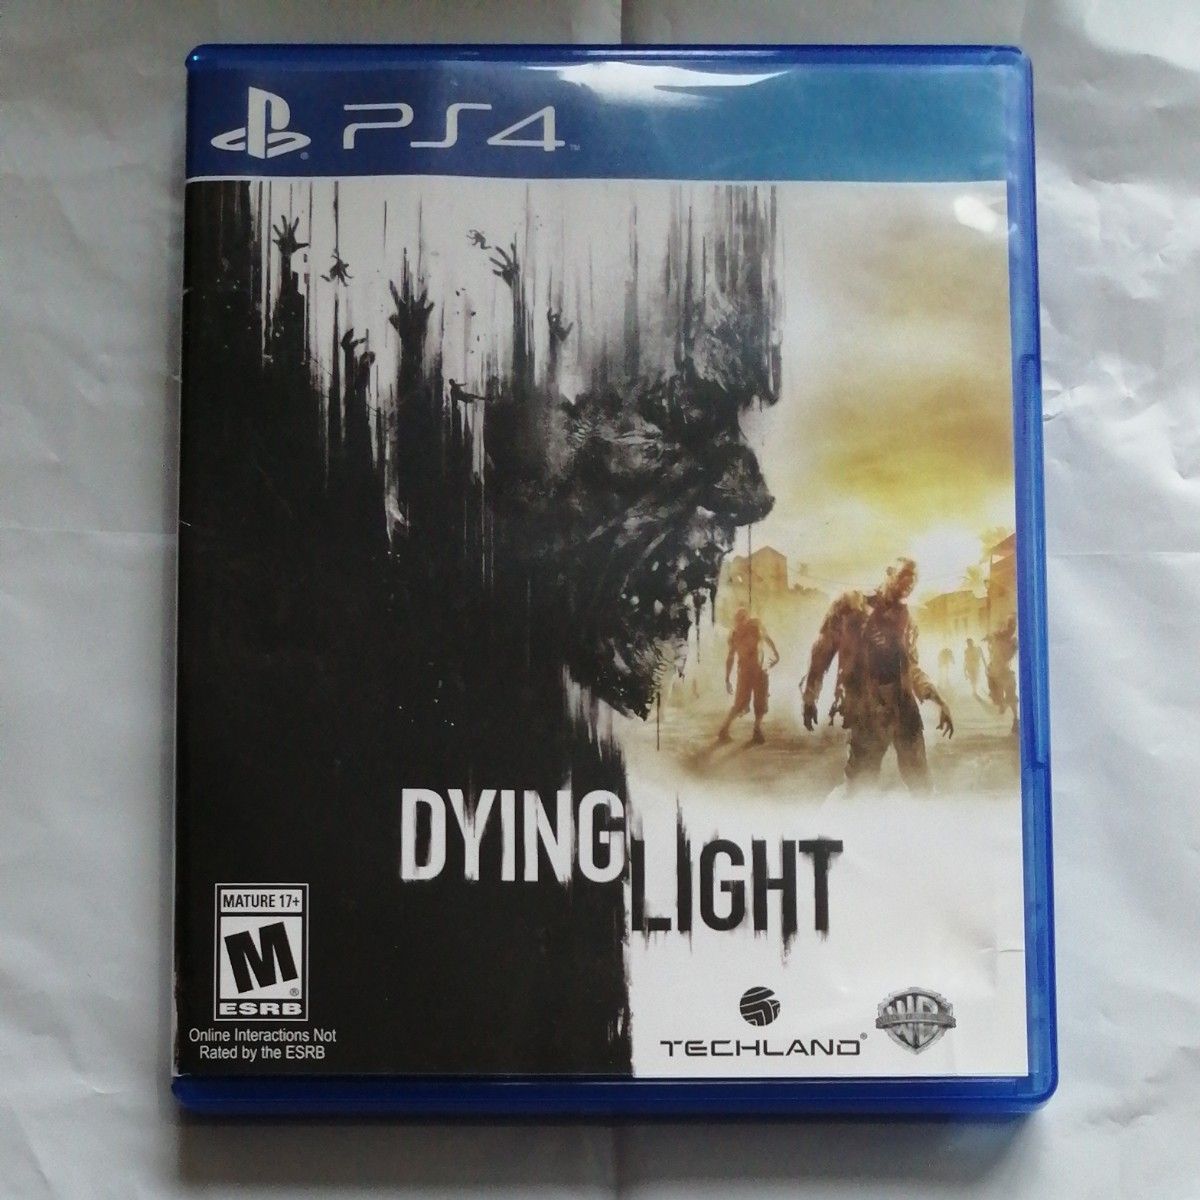 Fugtighed usikre heroin Dying Light (北米版) - PS4｜PayPayフリマ